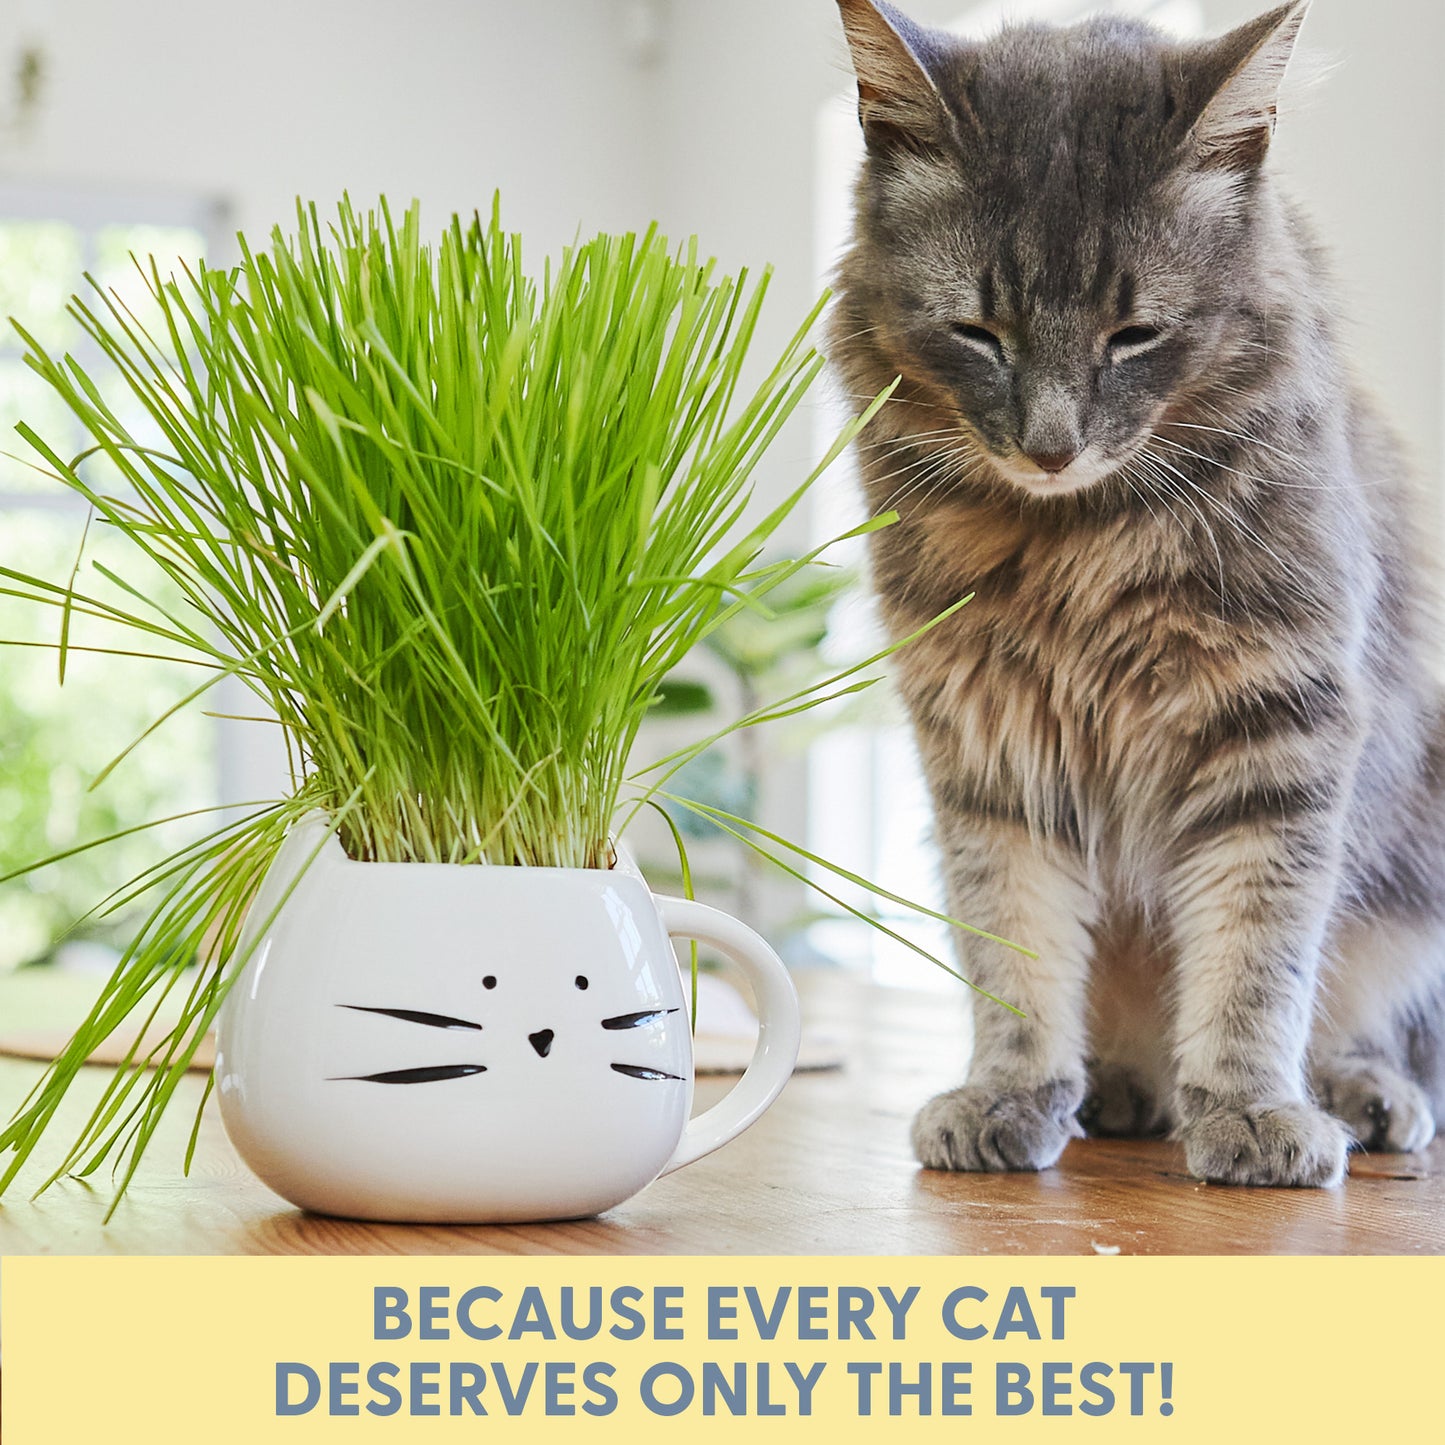 Cat Grass Growing Kit with Cat Grass Seed - White Cat Mug Planter